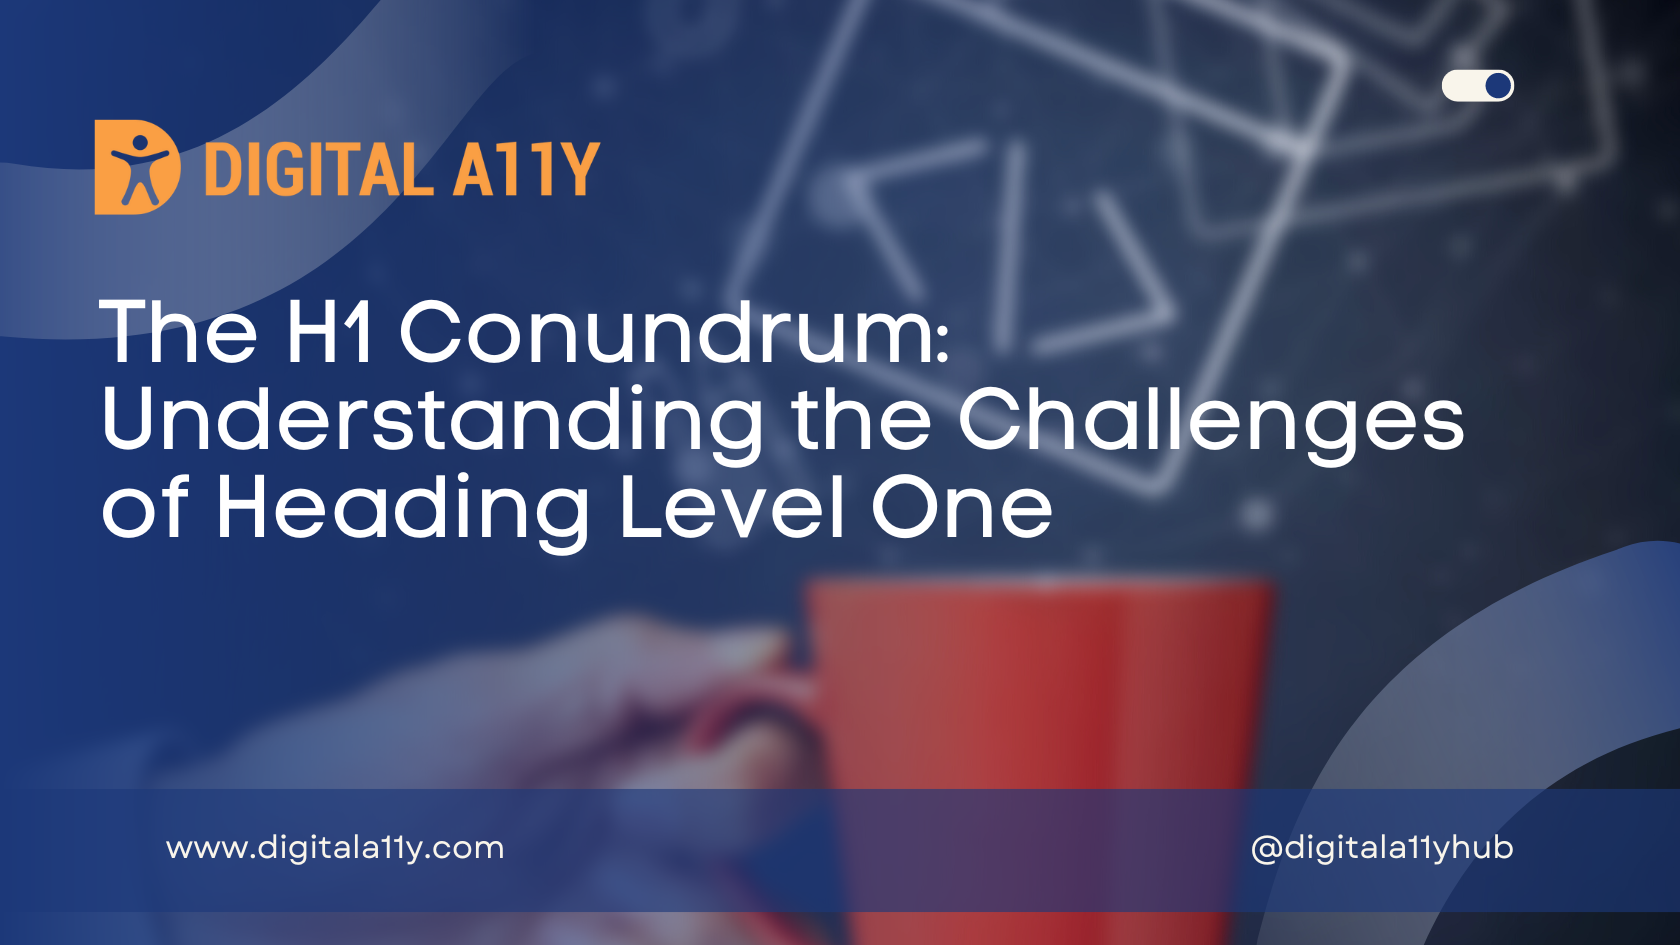 The H1 Conundrum: Understanding the Challenges of Heading Level One